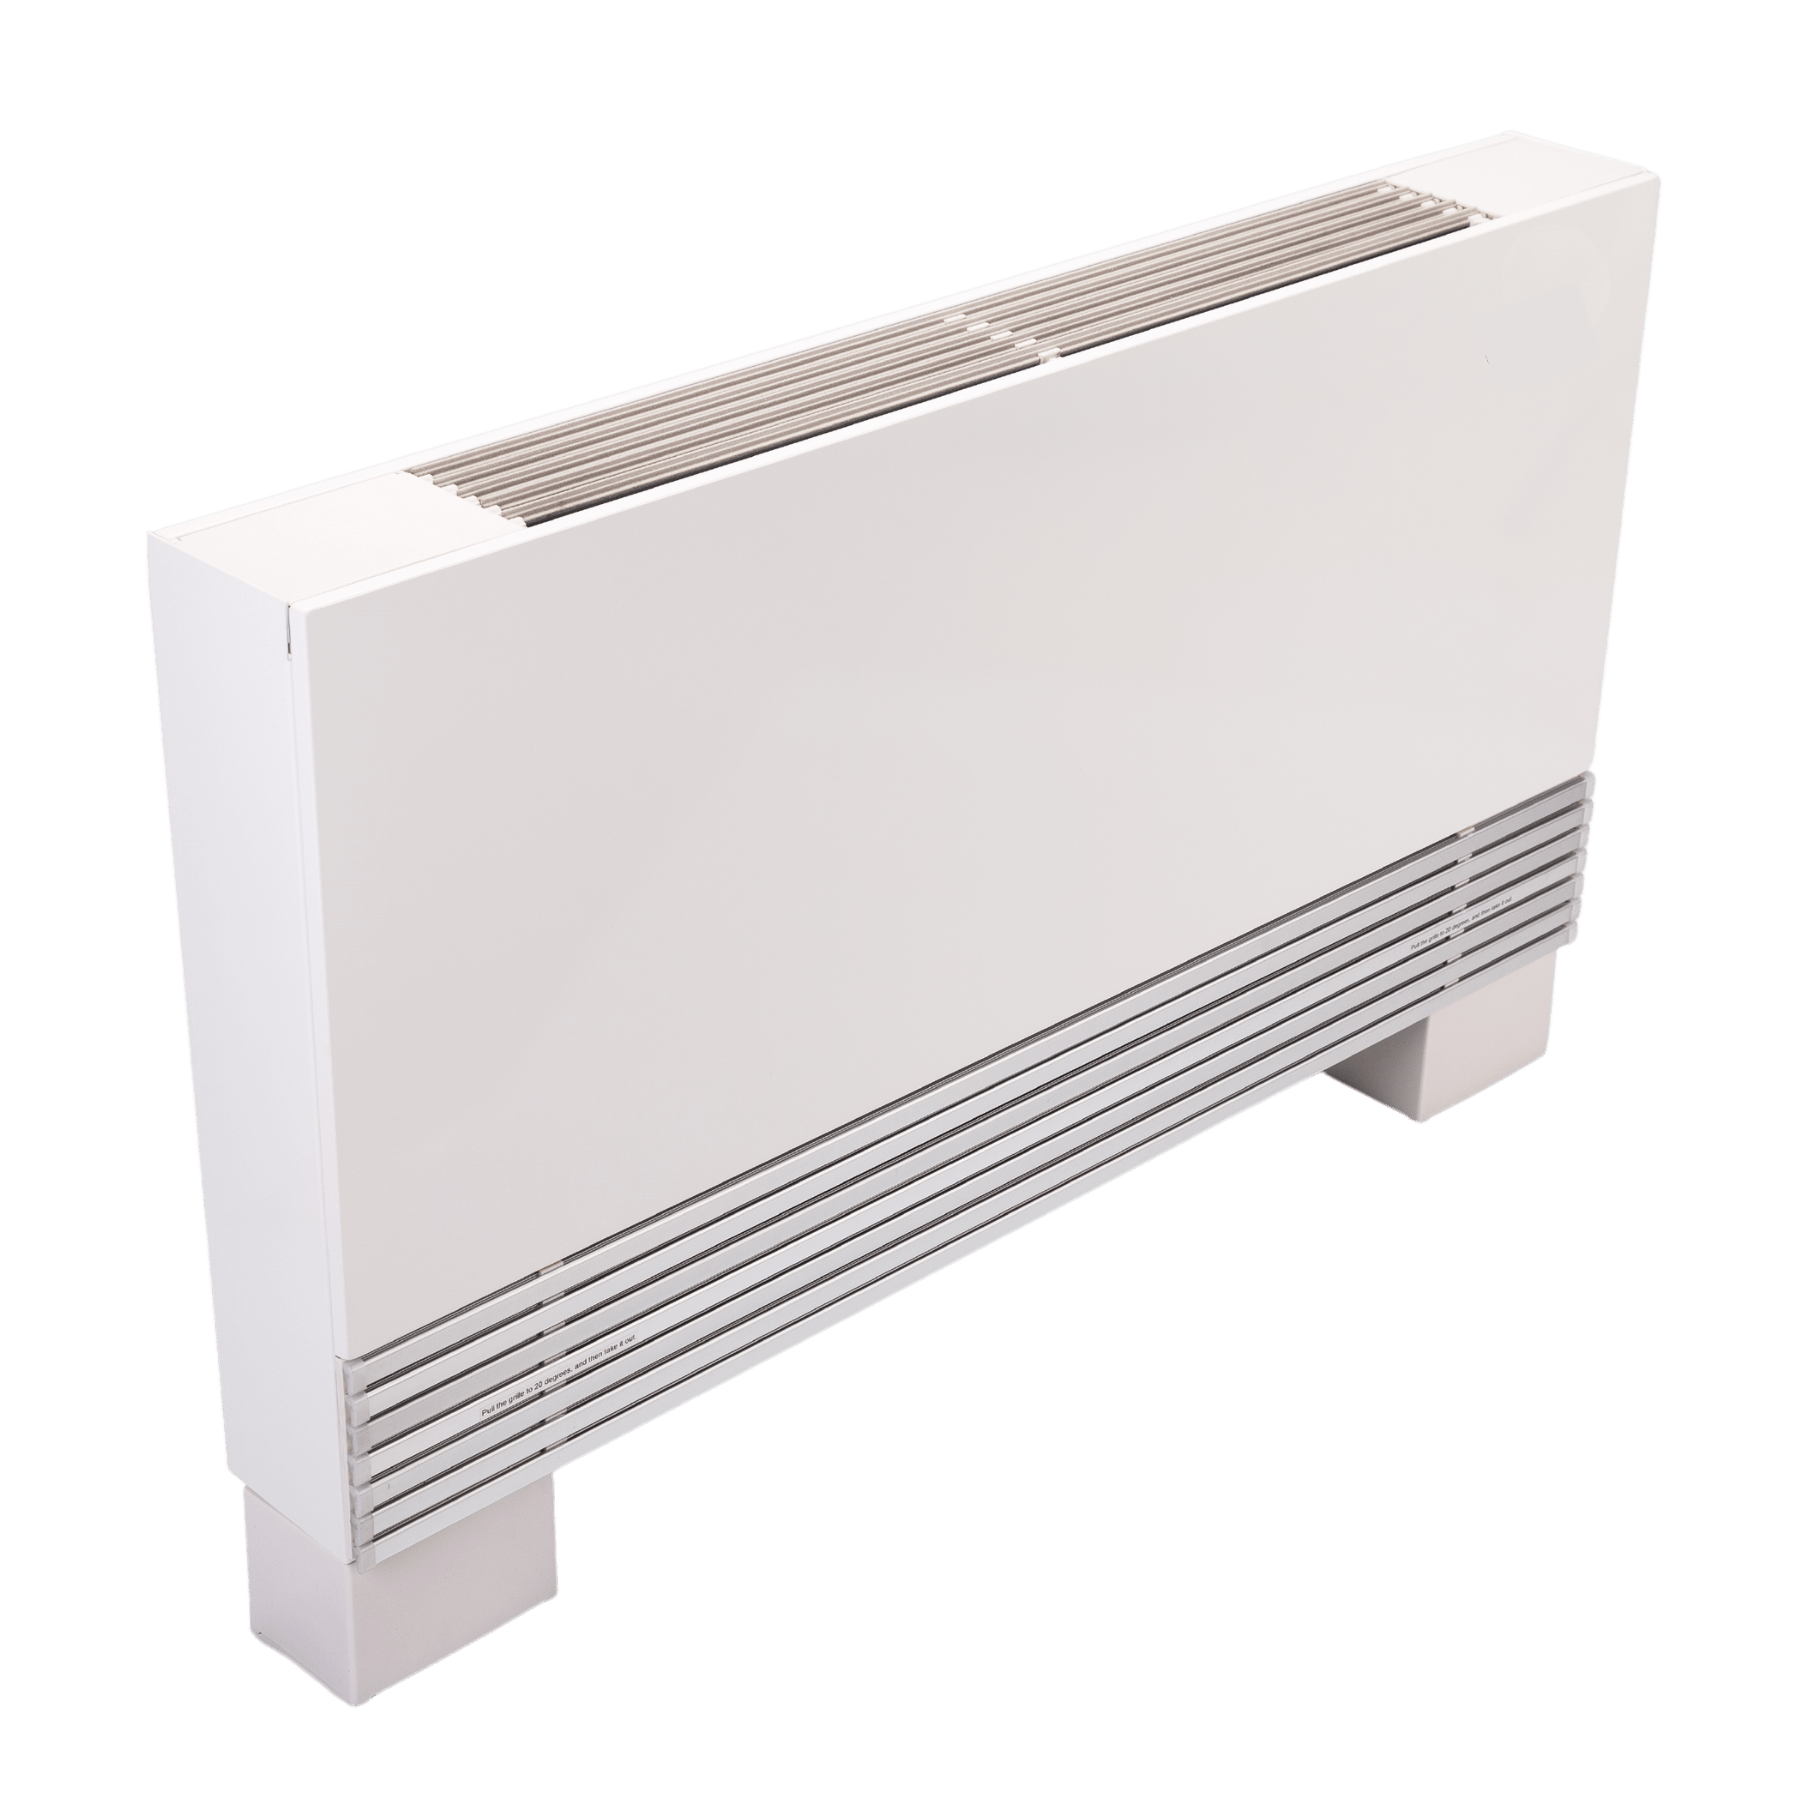 Hydronic Ultra Thin Fan Coil Unit, PFP-030, 2 Pipe System, 120/230V - Capacity 1/4 Ton (Coming Soon)